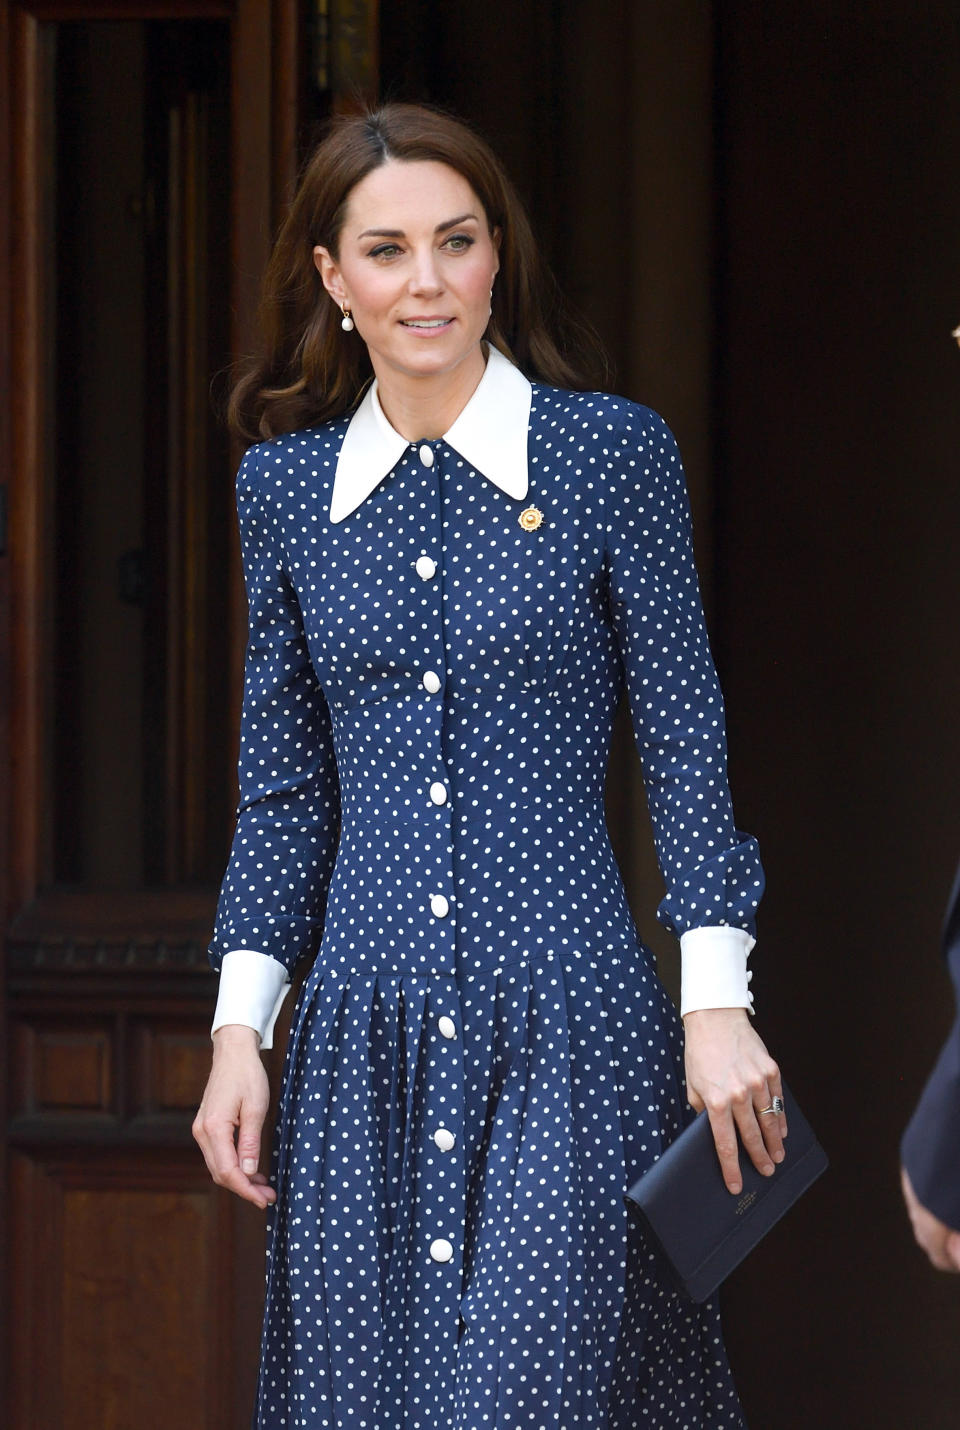 The Duchess of Cambridge wore a polka dot Alessandra Rich dress when she visited the D-Day exhibition at Bletchley Park on May 14, 2019. (Getty Images)